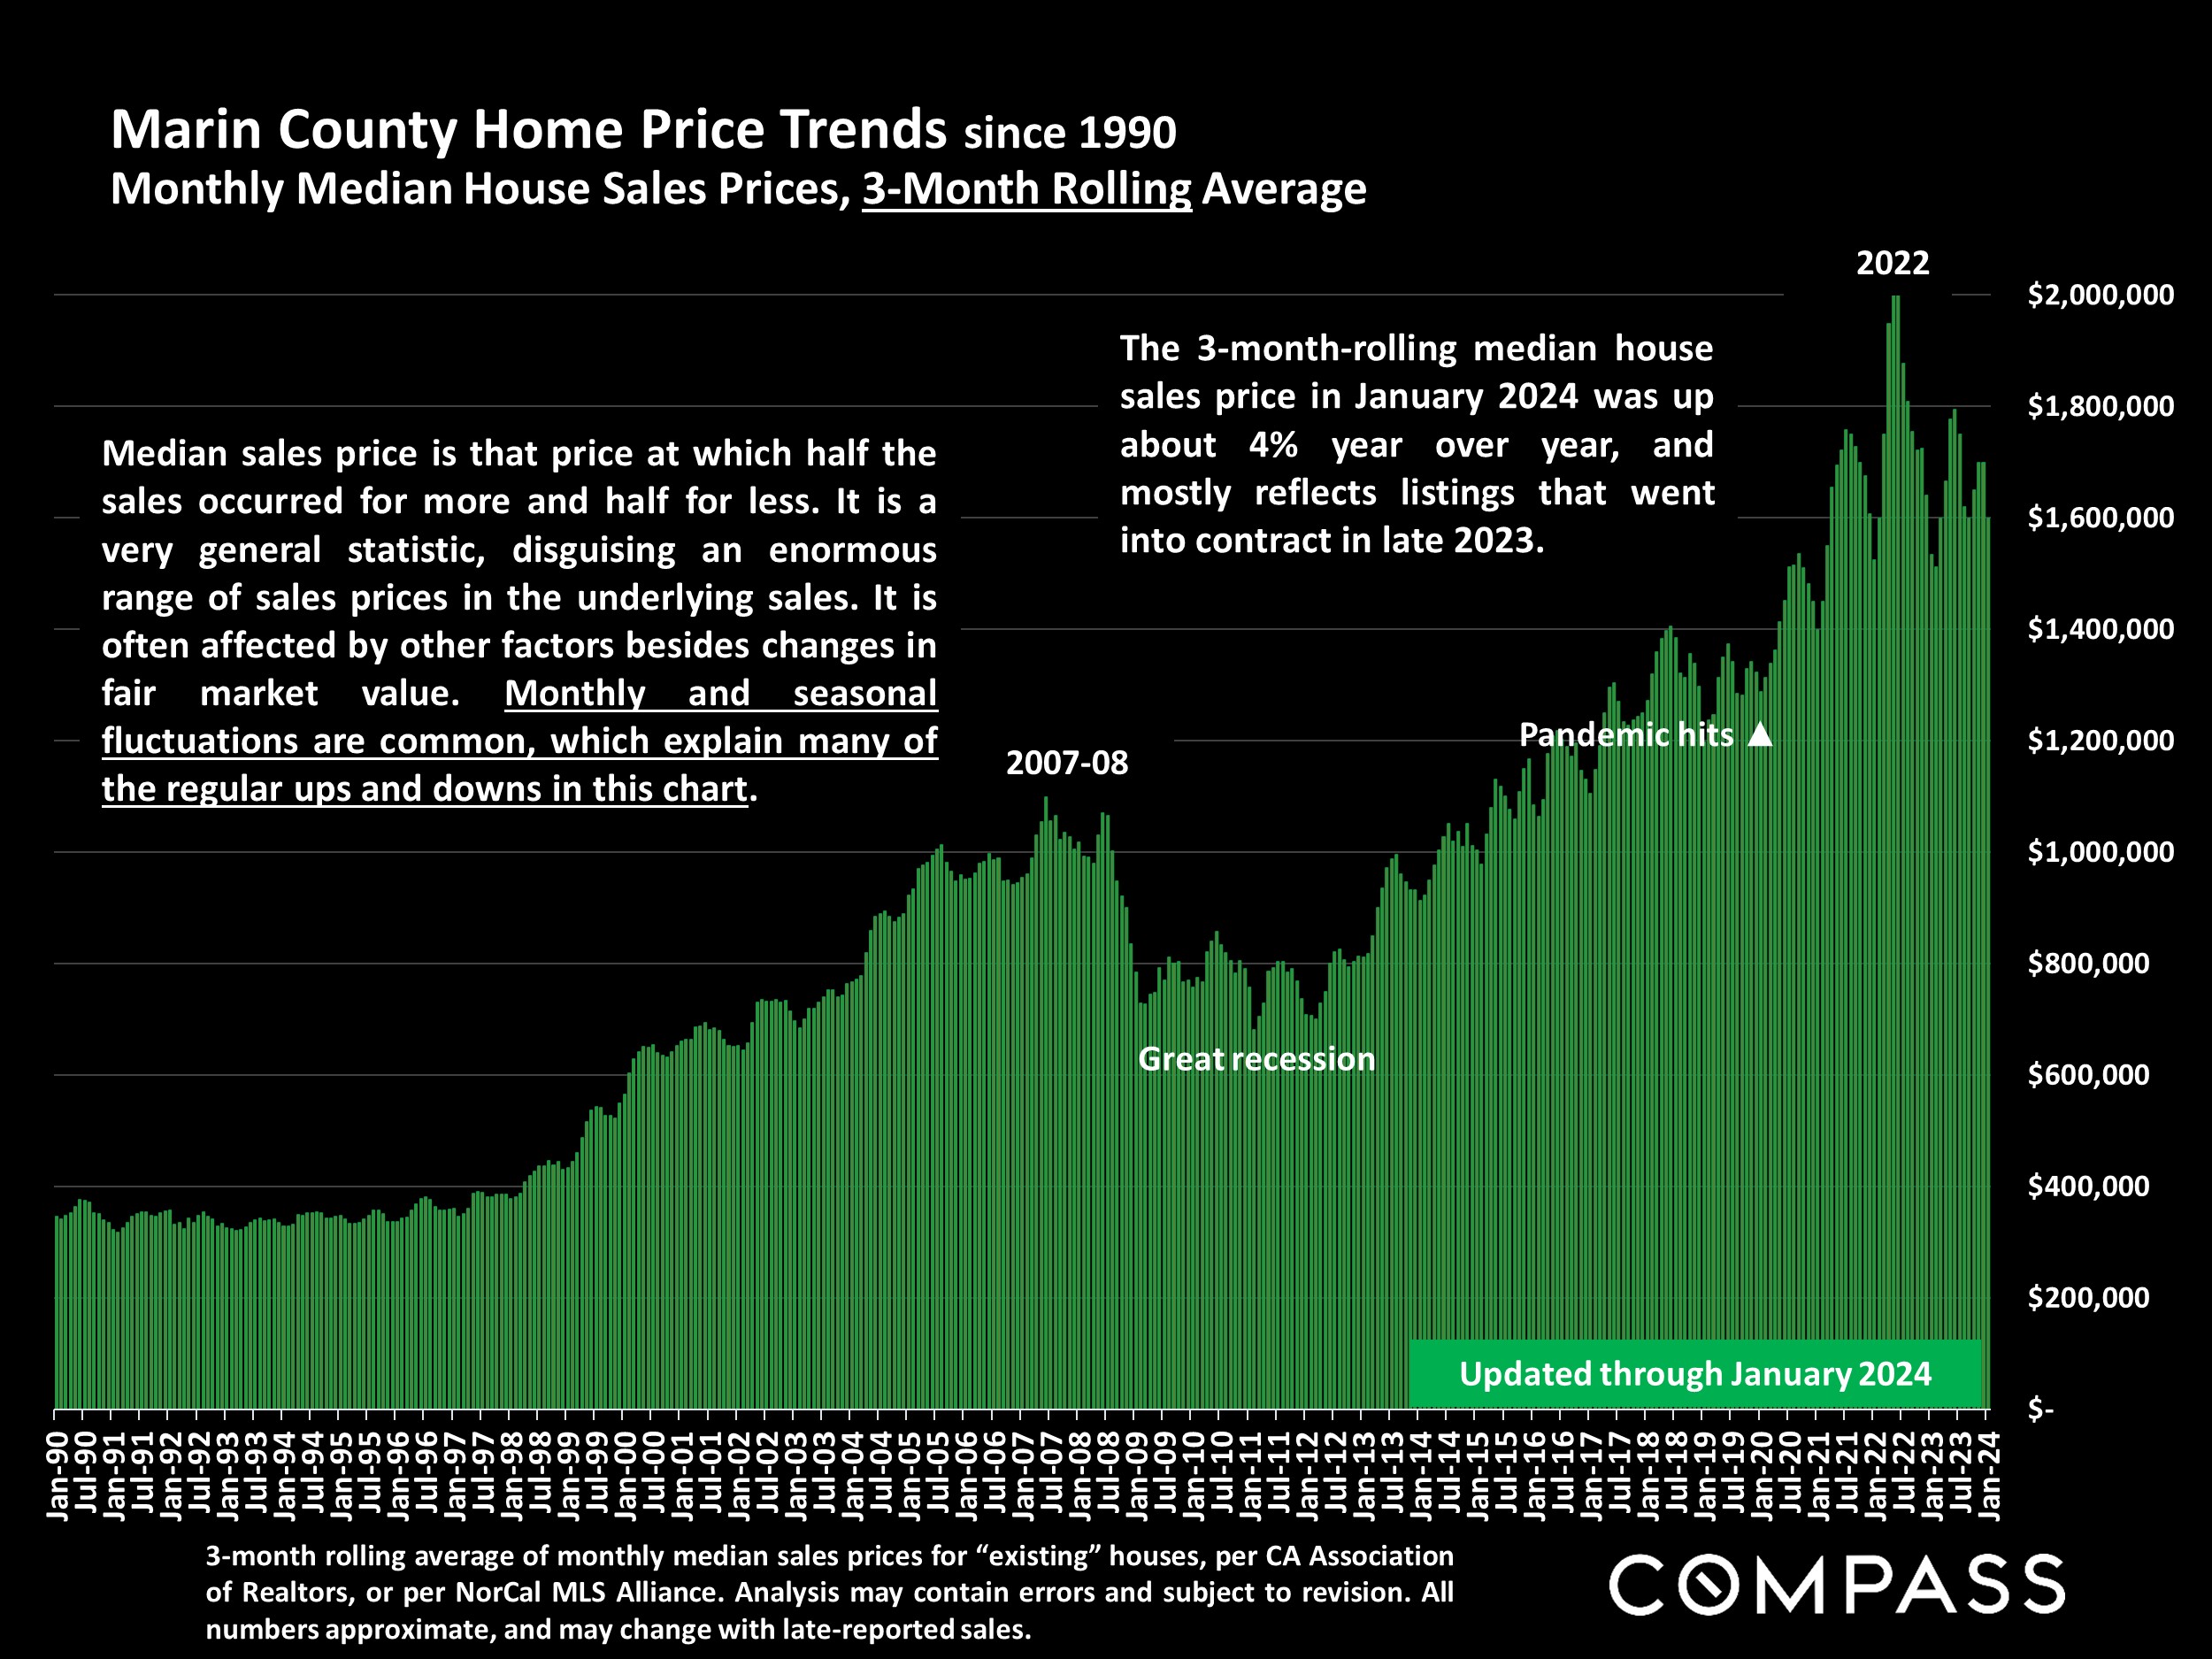 Marin County Home Price Trends since 1990 Monthly Median House Sales Prices, 3-Month Rolling Average